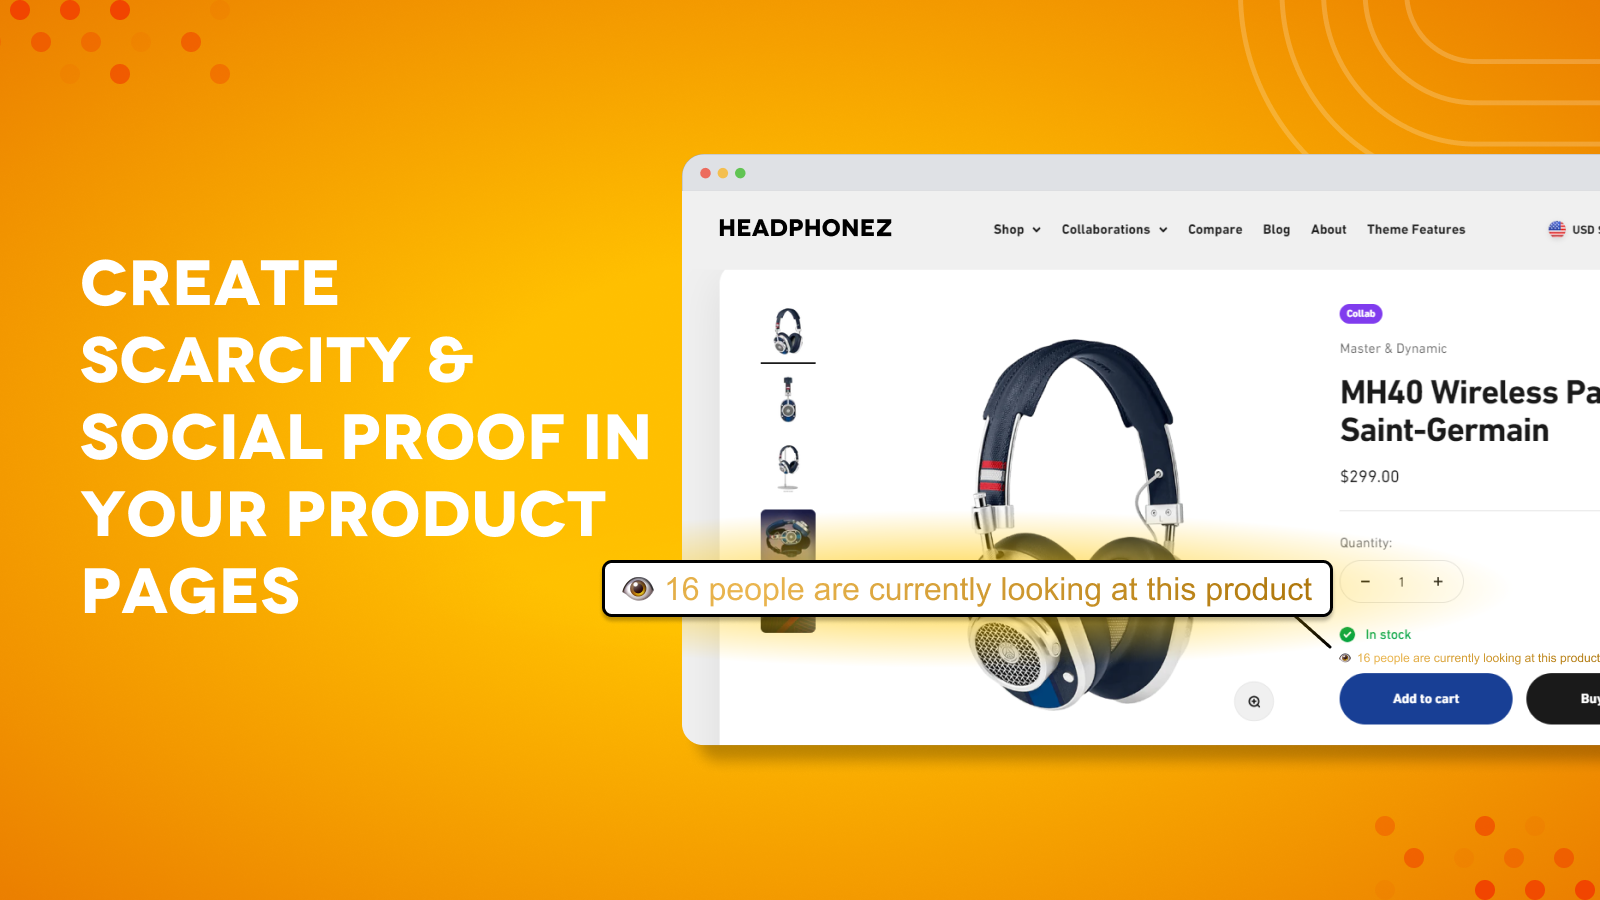 The Scarcity Live Visitors Counter in a product page of a store